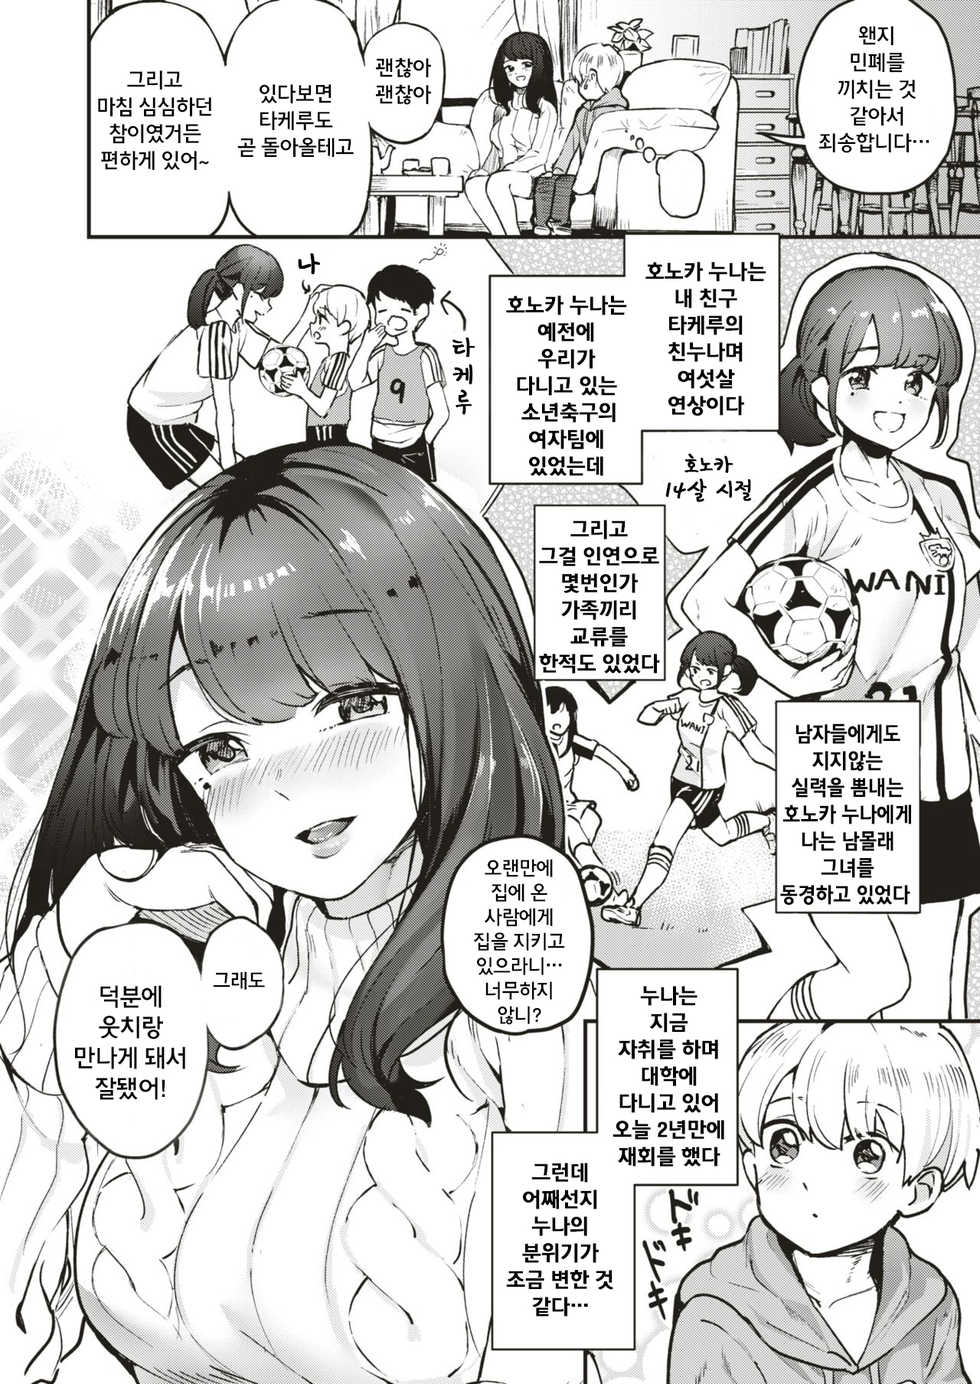 [ababari] Tomodachi no Onee-san - Your sister is fucking special | 친구의 누나 (COMIC X-EROS #79) [Korean] [Digital] - Page 2